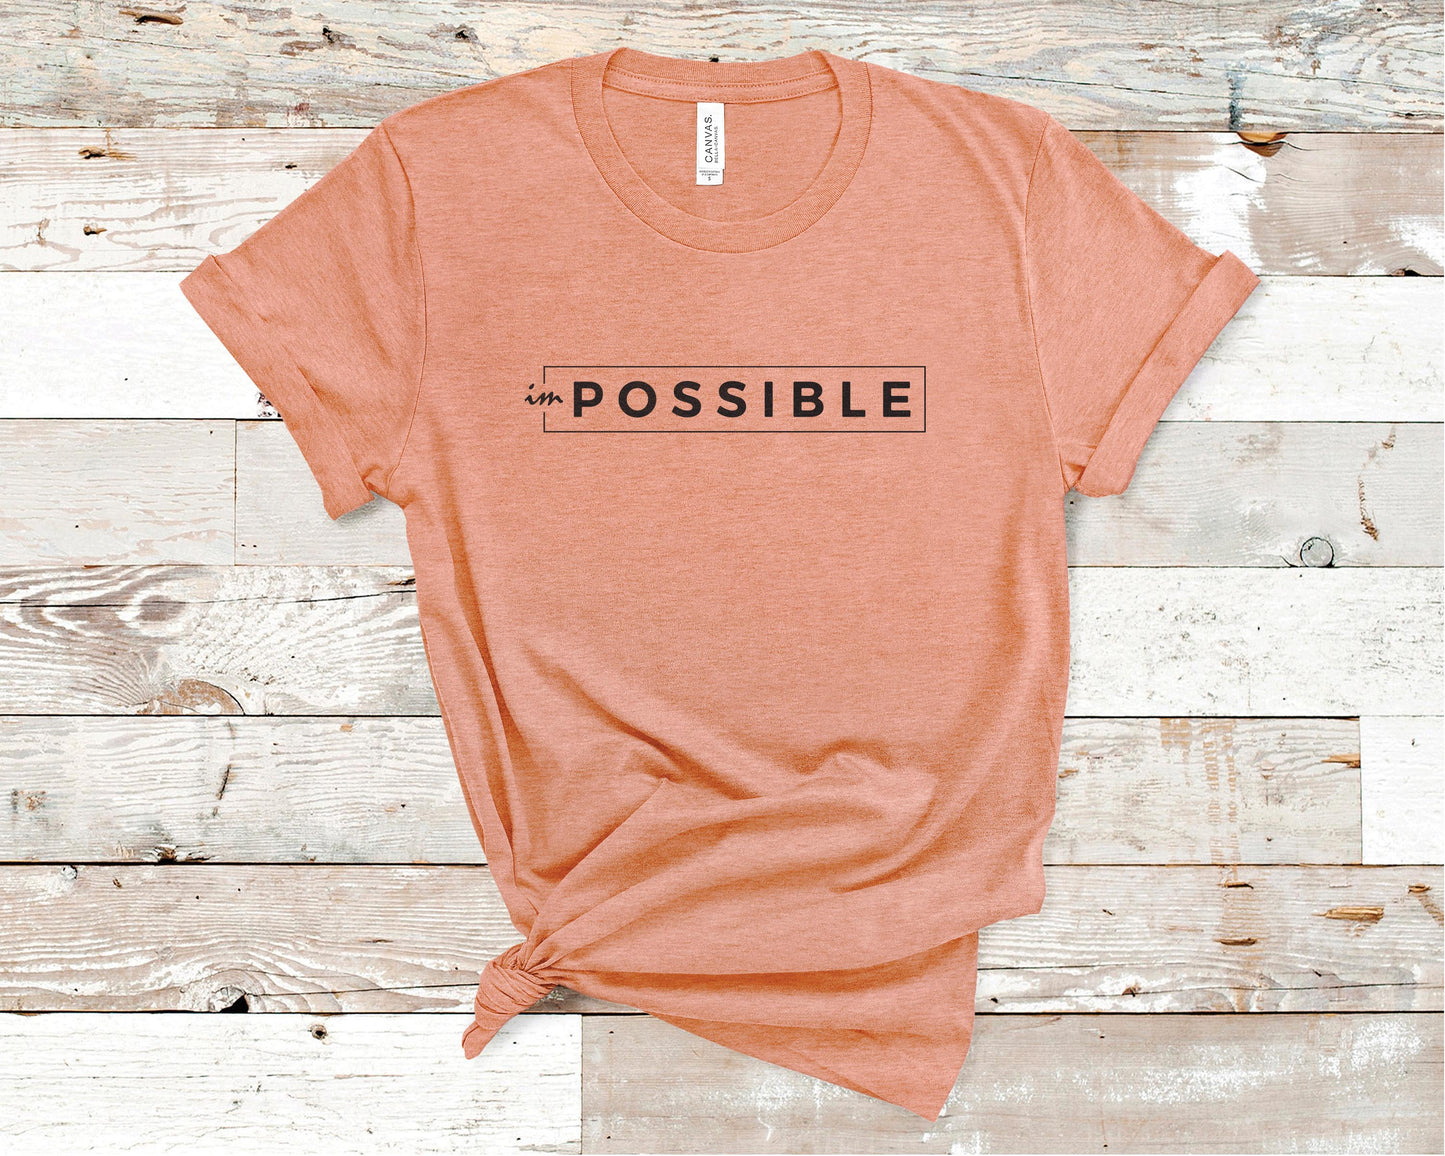 imPOSSIBLE - Fitness Shirt